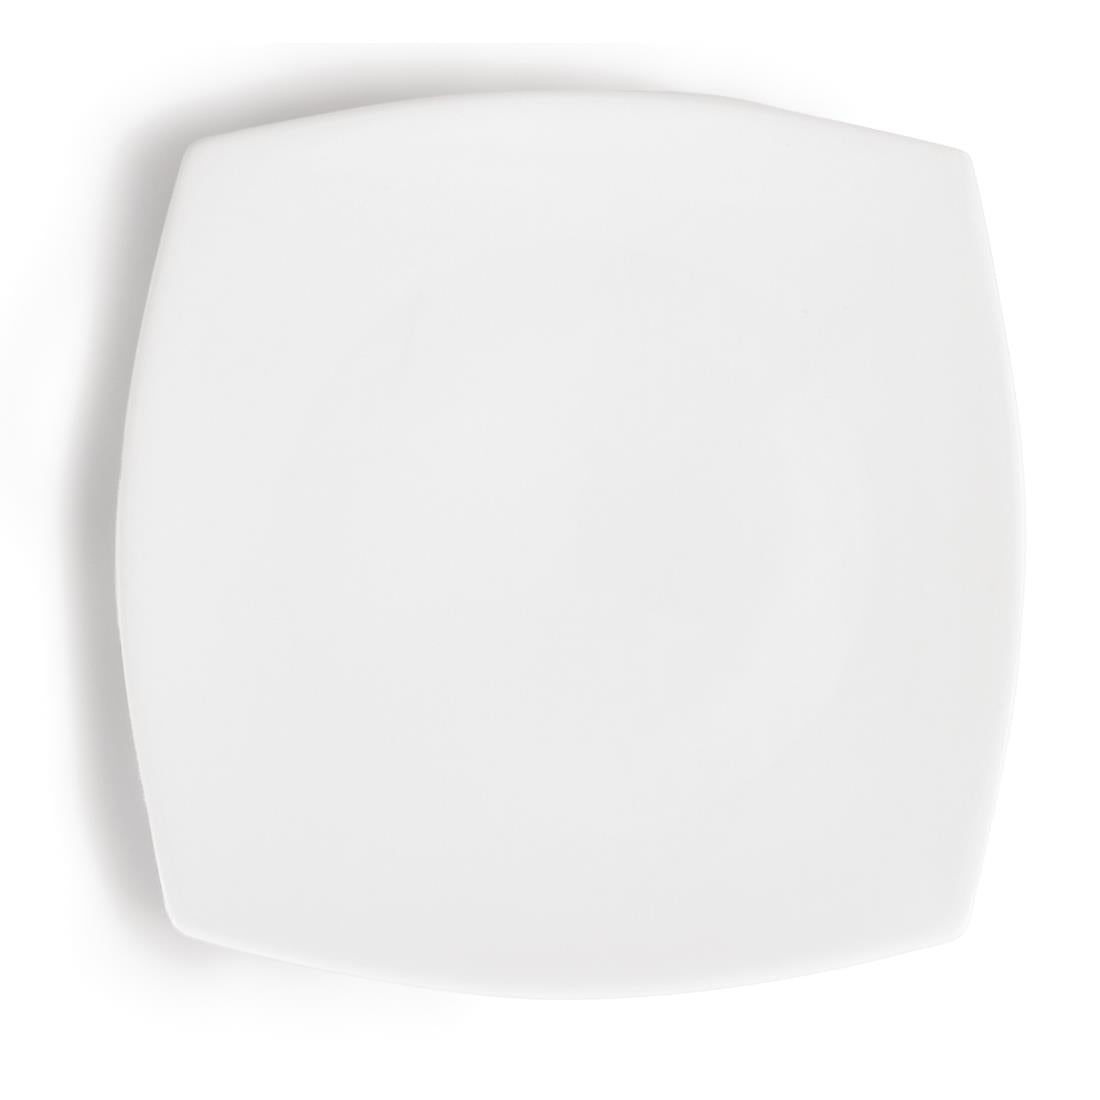 CB493 Olympia Whiteware Rounded Square Plates 270mm (Pack of 6)